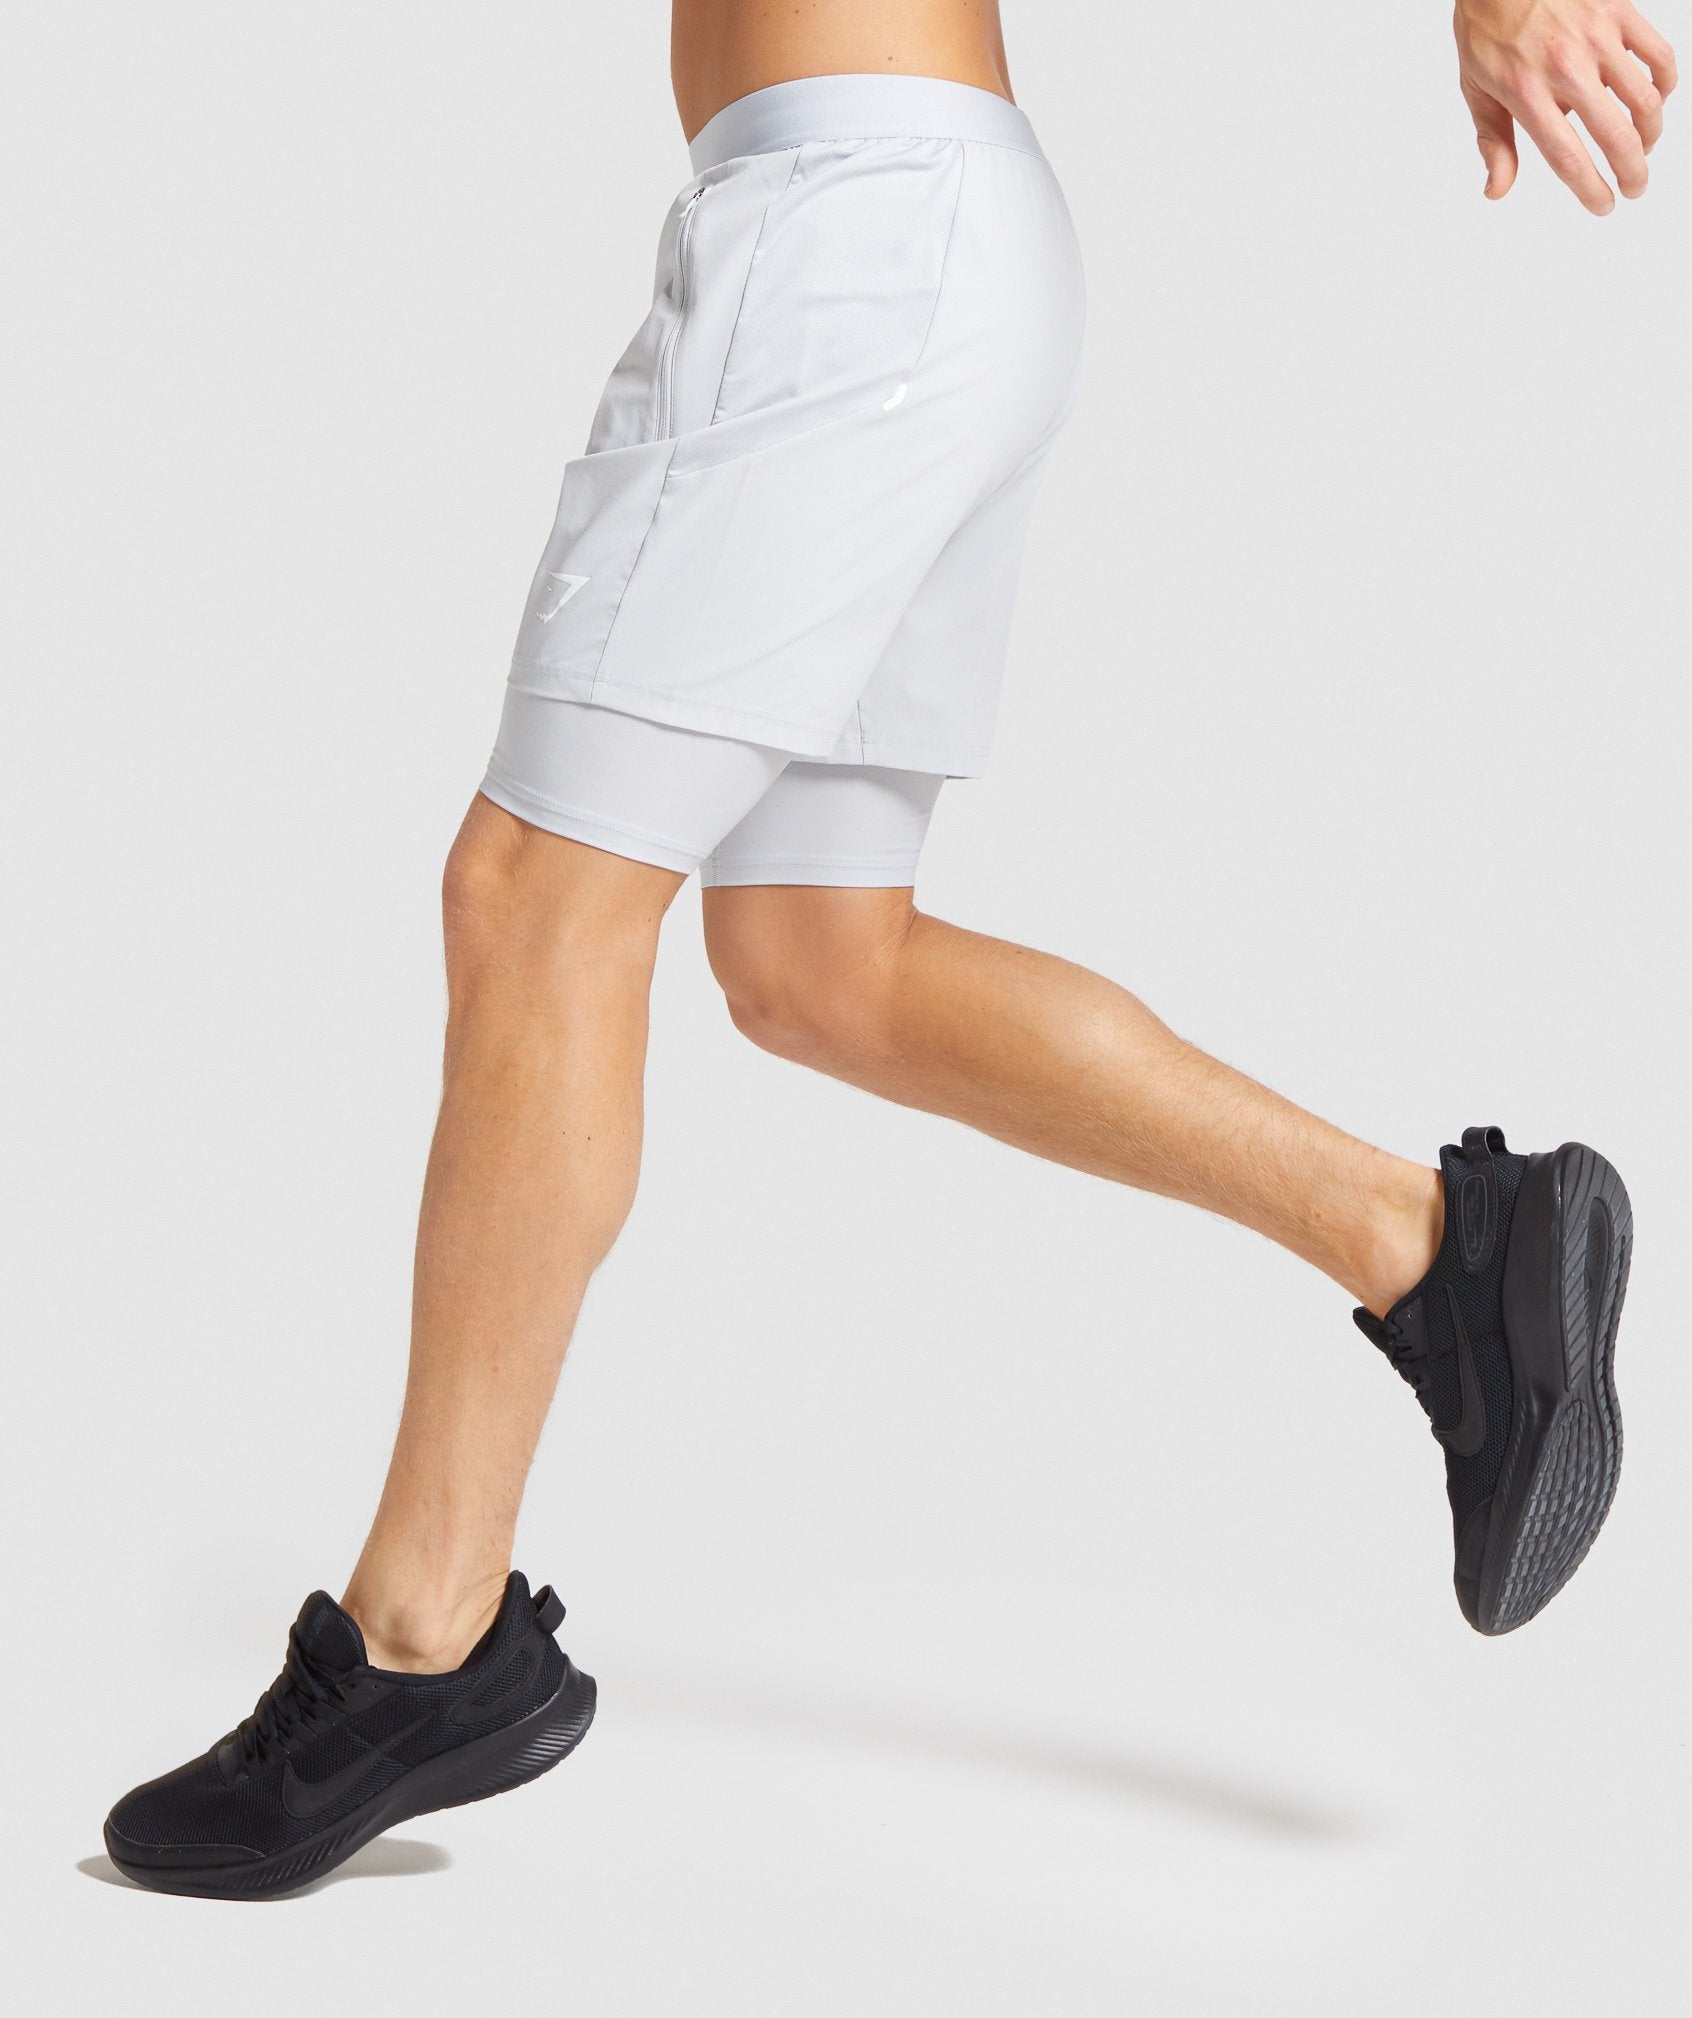 Element Hiit 2 in 1 Shorts in Grey - view 3